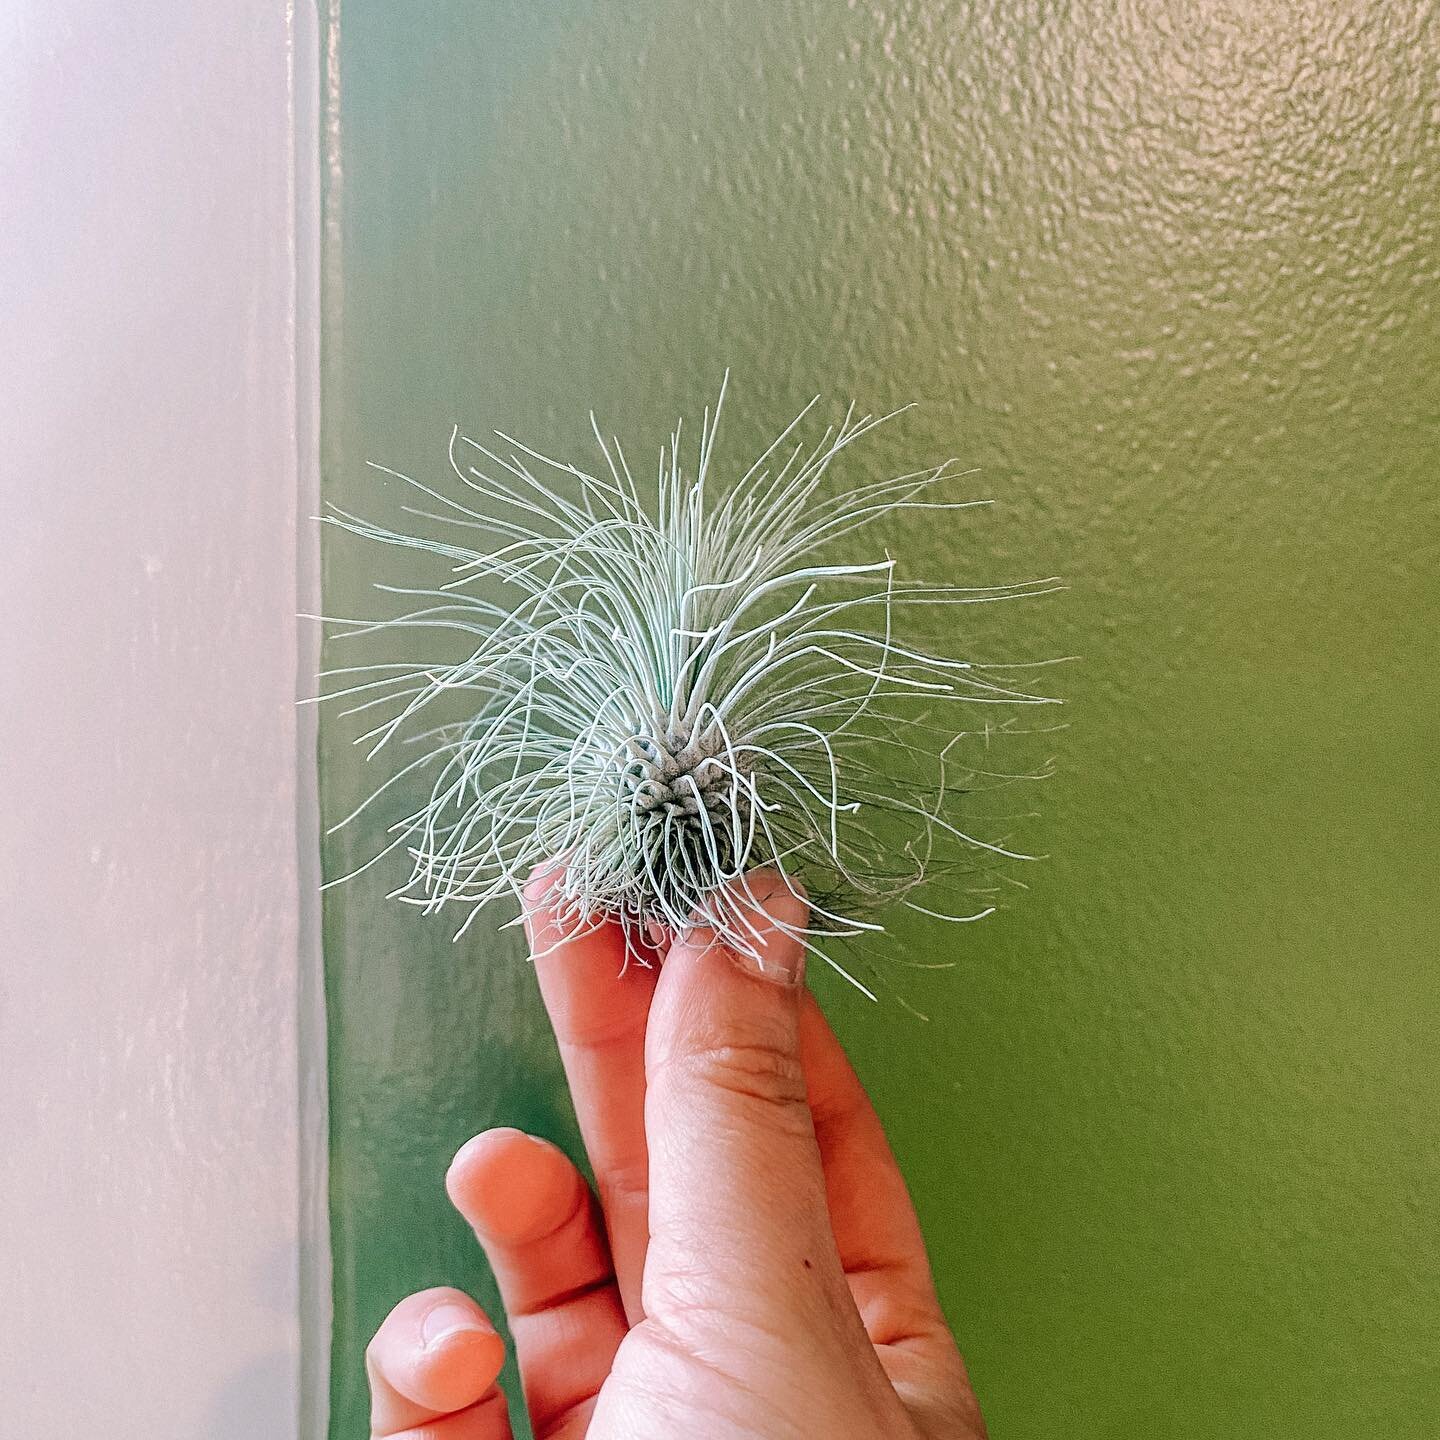 Fresh batch of airplants in for the week&hellip; come check out the new little weirdos!
.
.
.
.
.
.
#tillandsia #tillandsiafuchsii #airplants #pistilxpage #gardinermaine